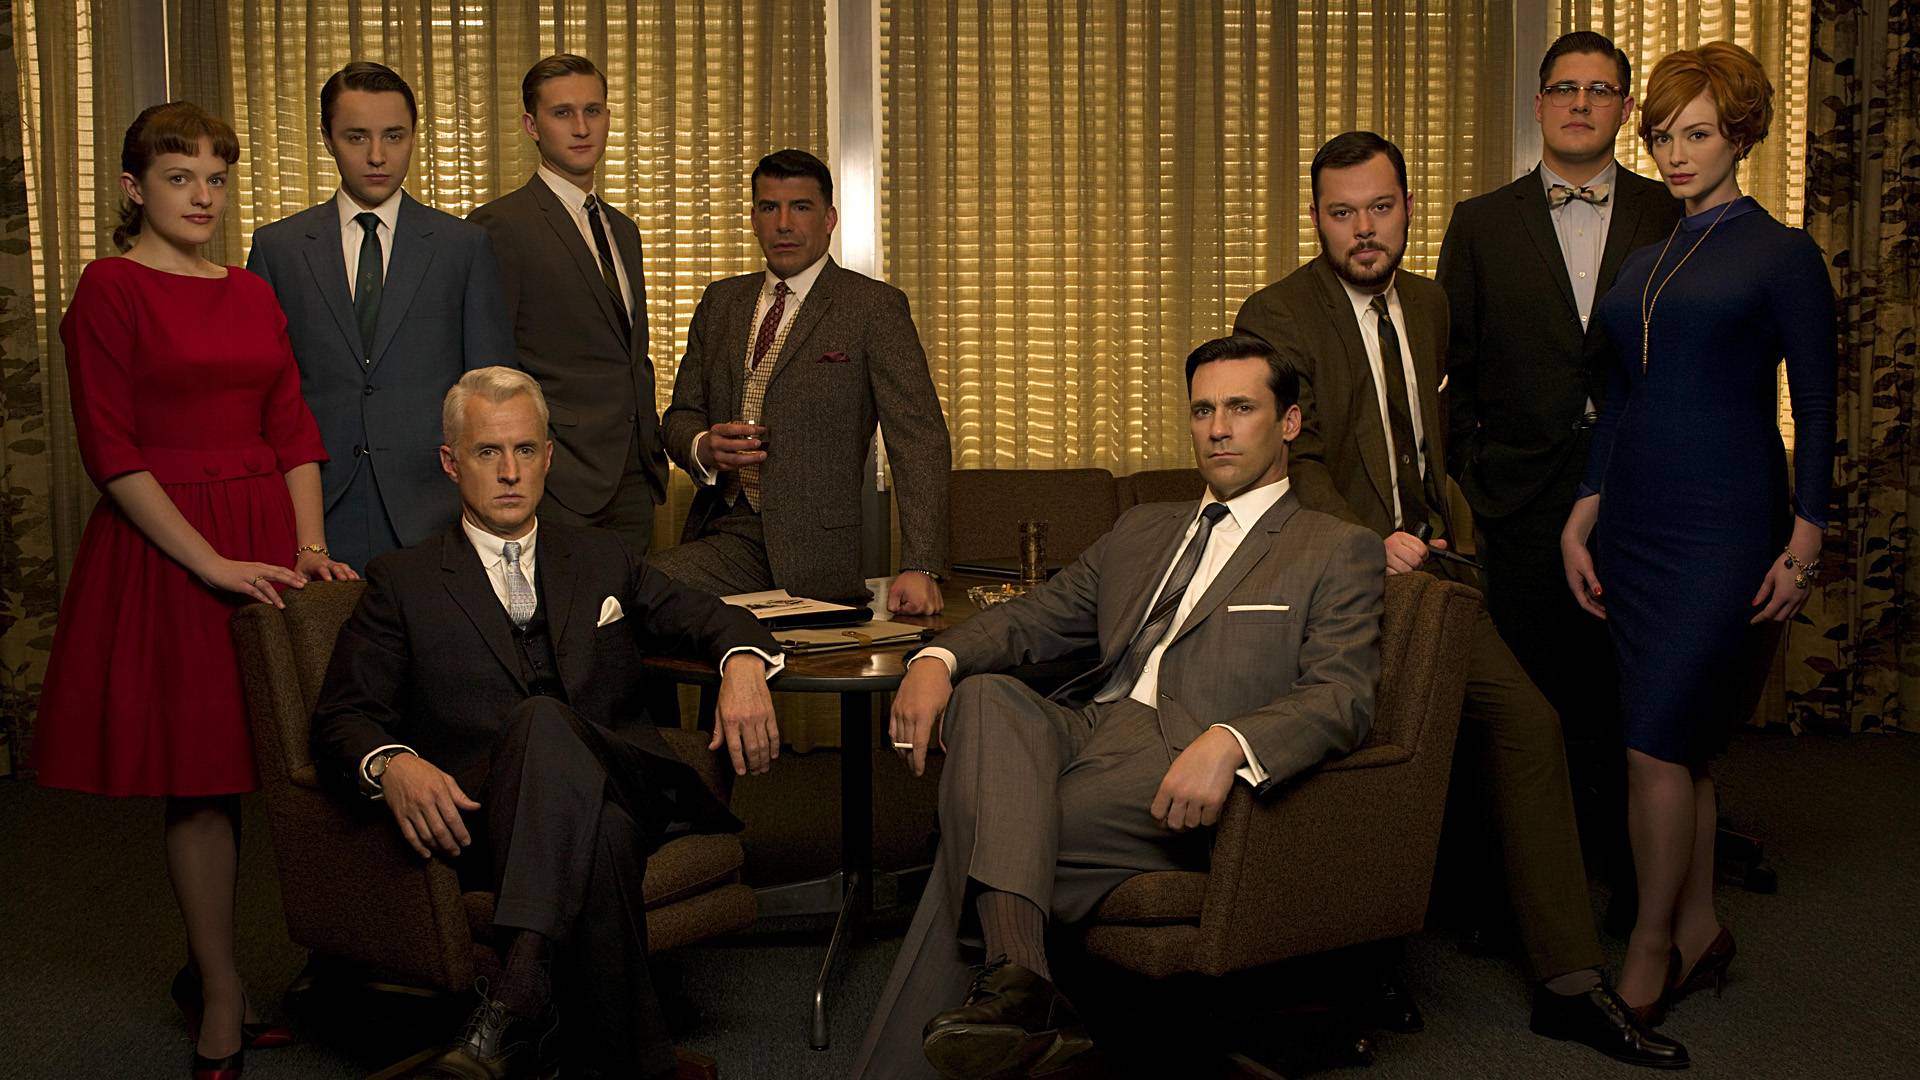 ‘Mad Men’ Streaming Rights are Up for Grabs in 2020 – Who Will Win?